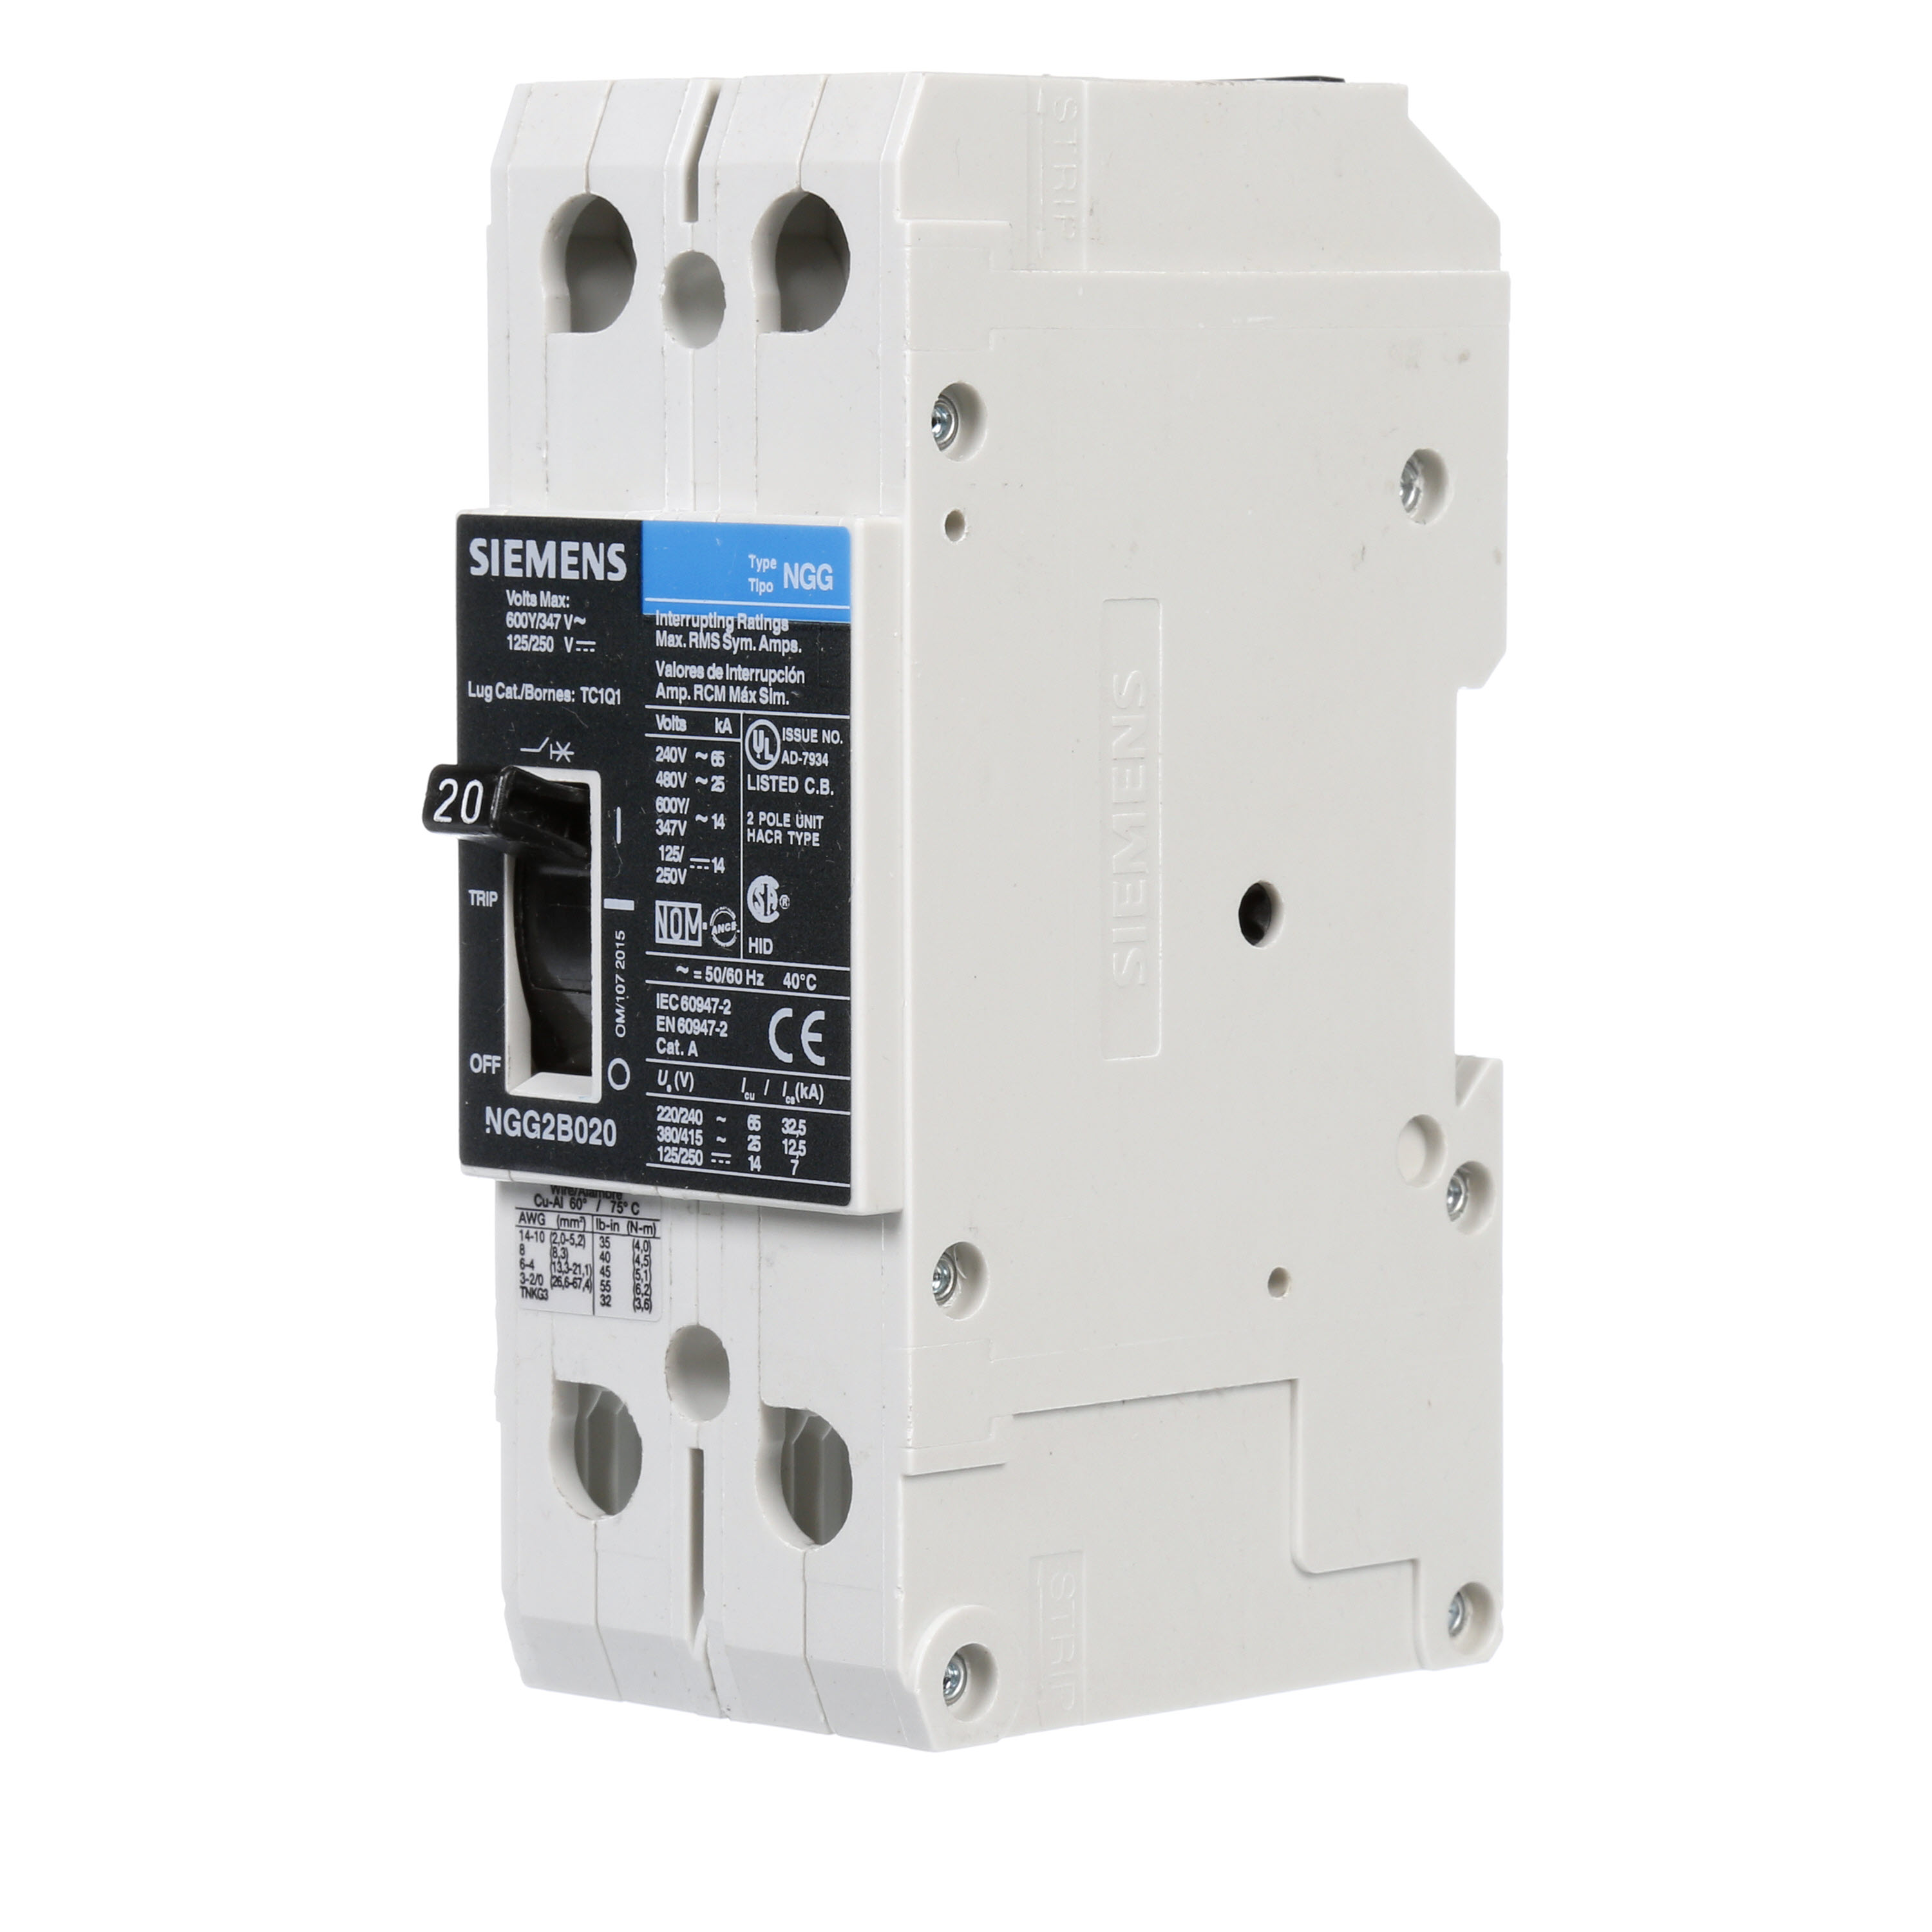 SIEMENS LOW VOLTAGE G FRAME CIRCUIT BREAKER WITH THERMAL - MAGNETIC TRIP. UL LISTED NGG FRAME WITH STANDARD BREAKING CAPACITY. 20A 2-POLE (14KAIC AT 600Y/347V)(25KAIC AT 480V). SPECIAL FEATURES MOUNTS ON DIN RAIL / SCREW, LINE AND LOAD SIDE LUGS (TC1Q1) WIRE RANGE 14 - 10 AWS (CU/AL). DIMENSIONS (W x H x D) IN 2 x 5.4 x 2.8.